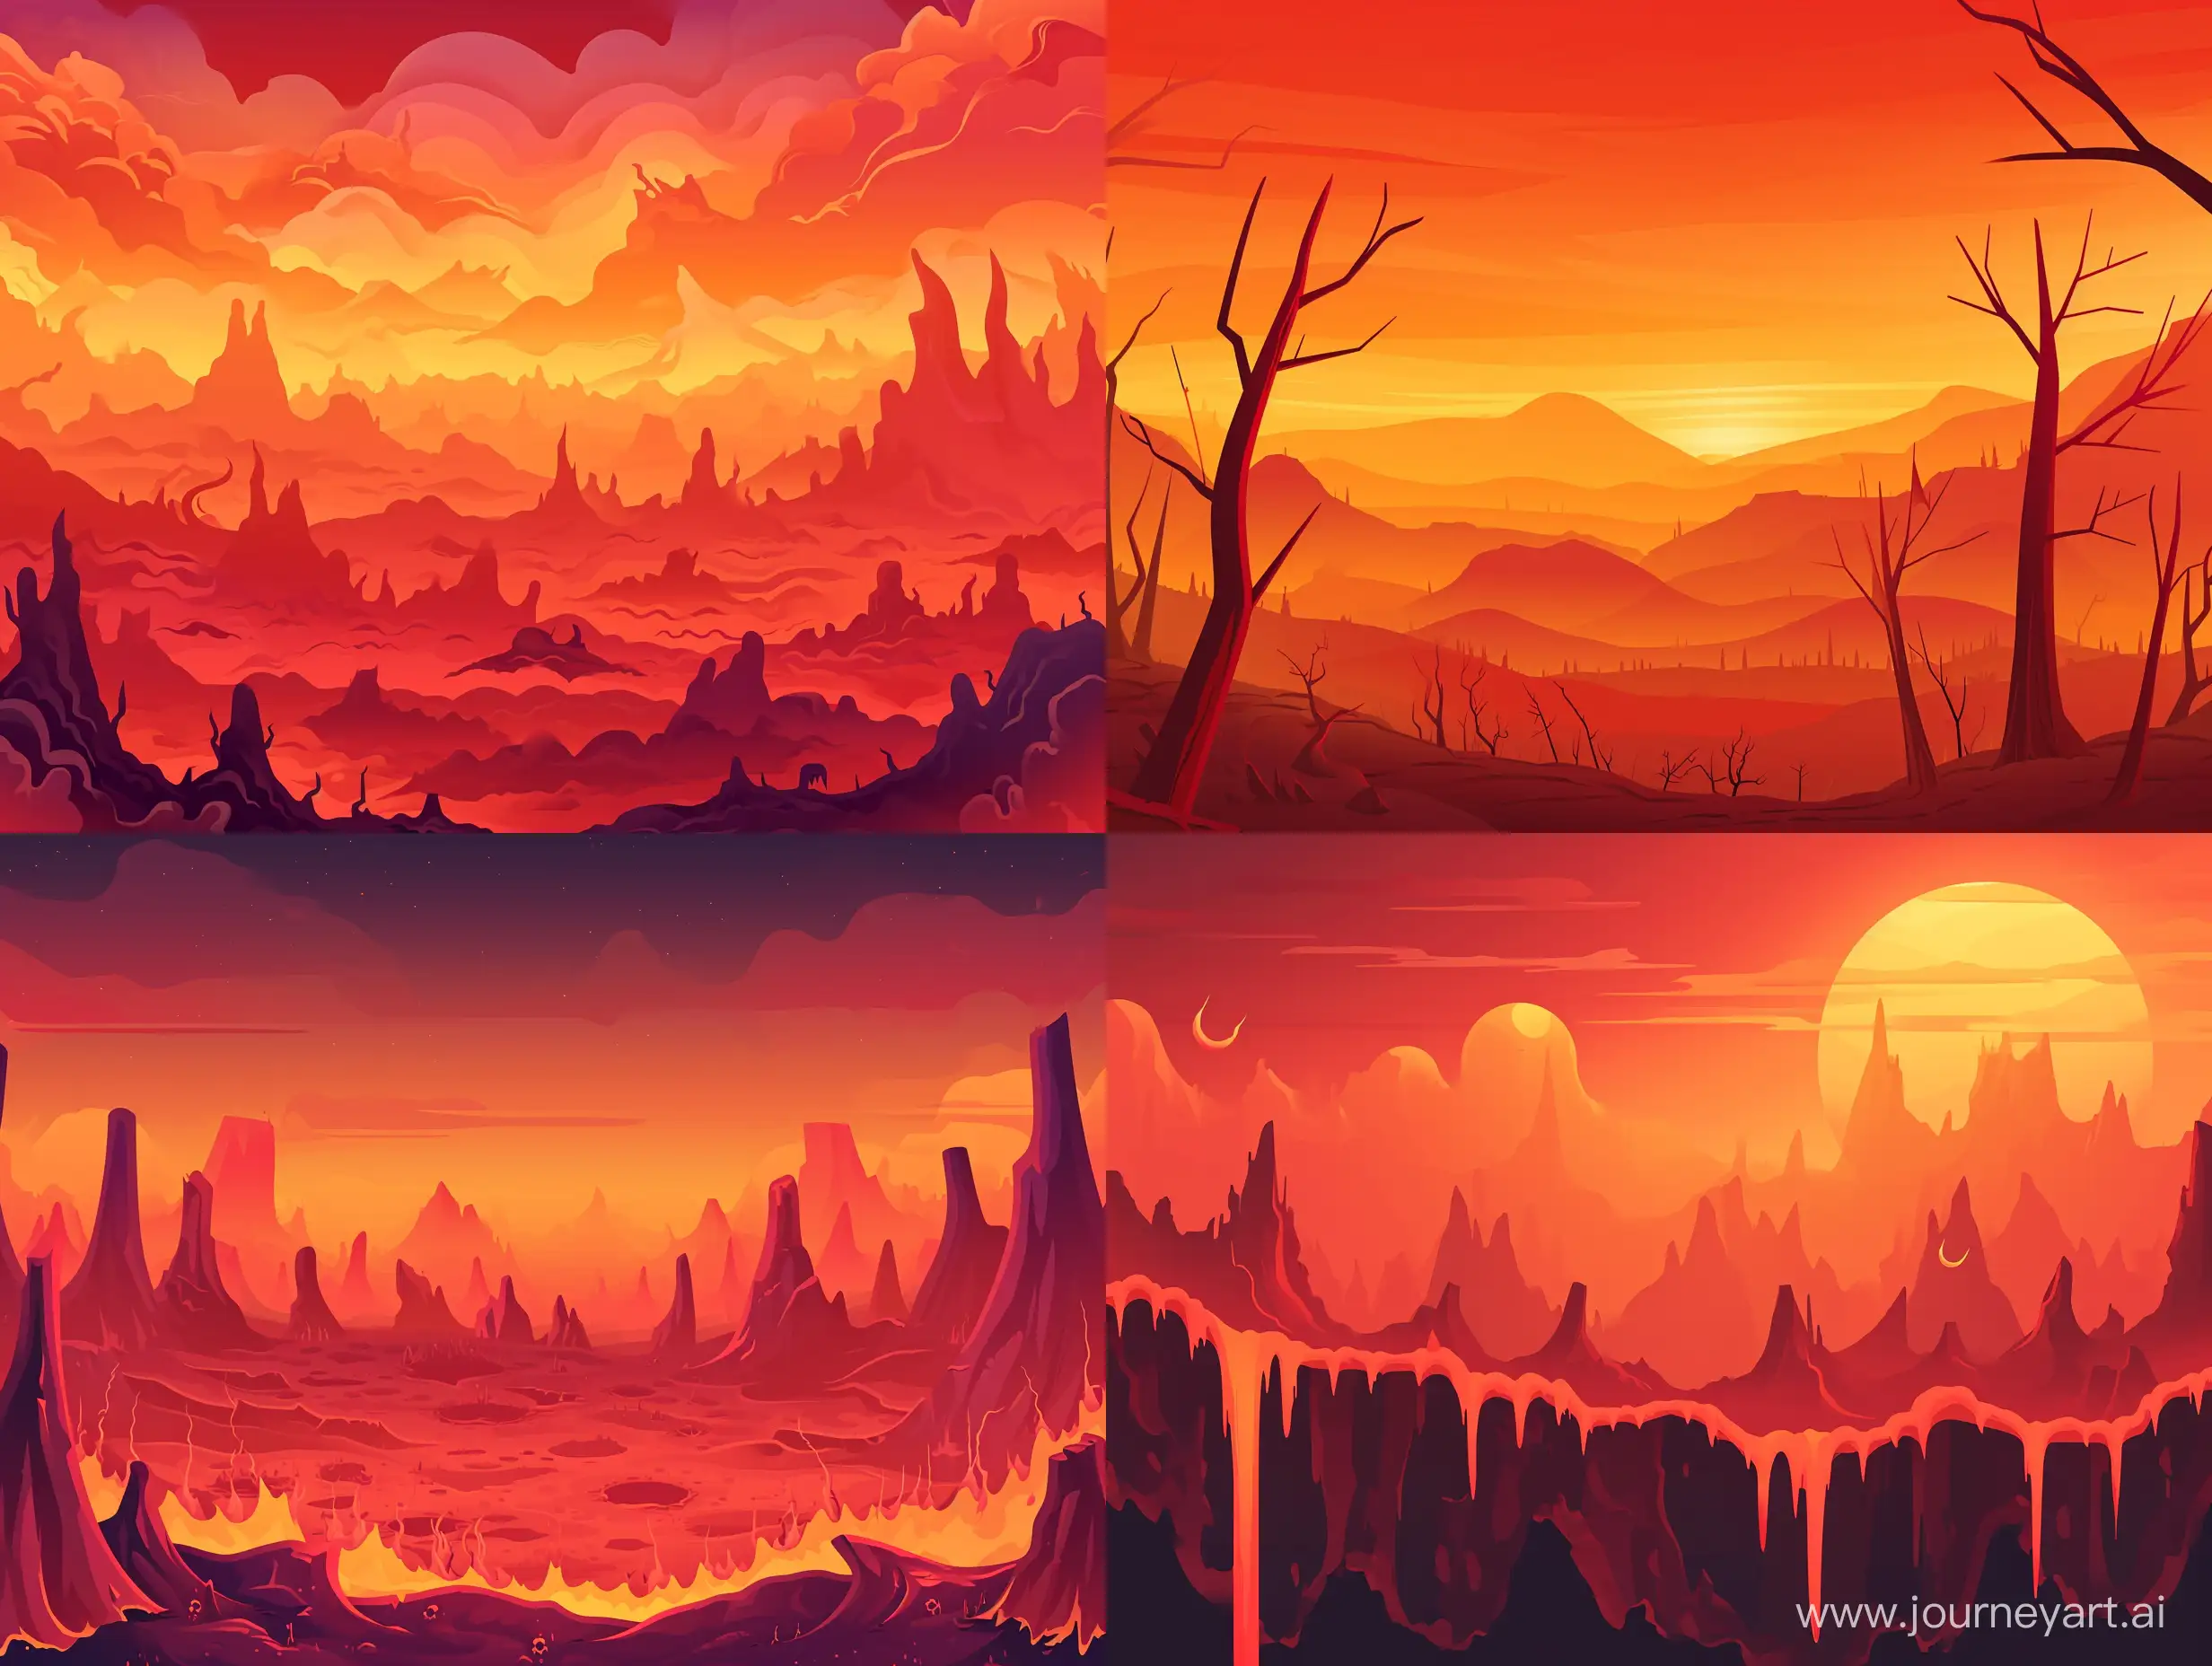 AN LANDSCAPE OF APOCALYPSE
, HELL looks, with a gradient color of ORANGE red, cartoon style
